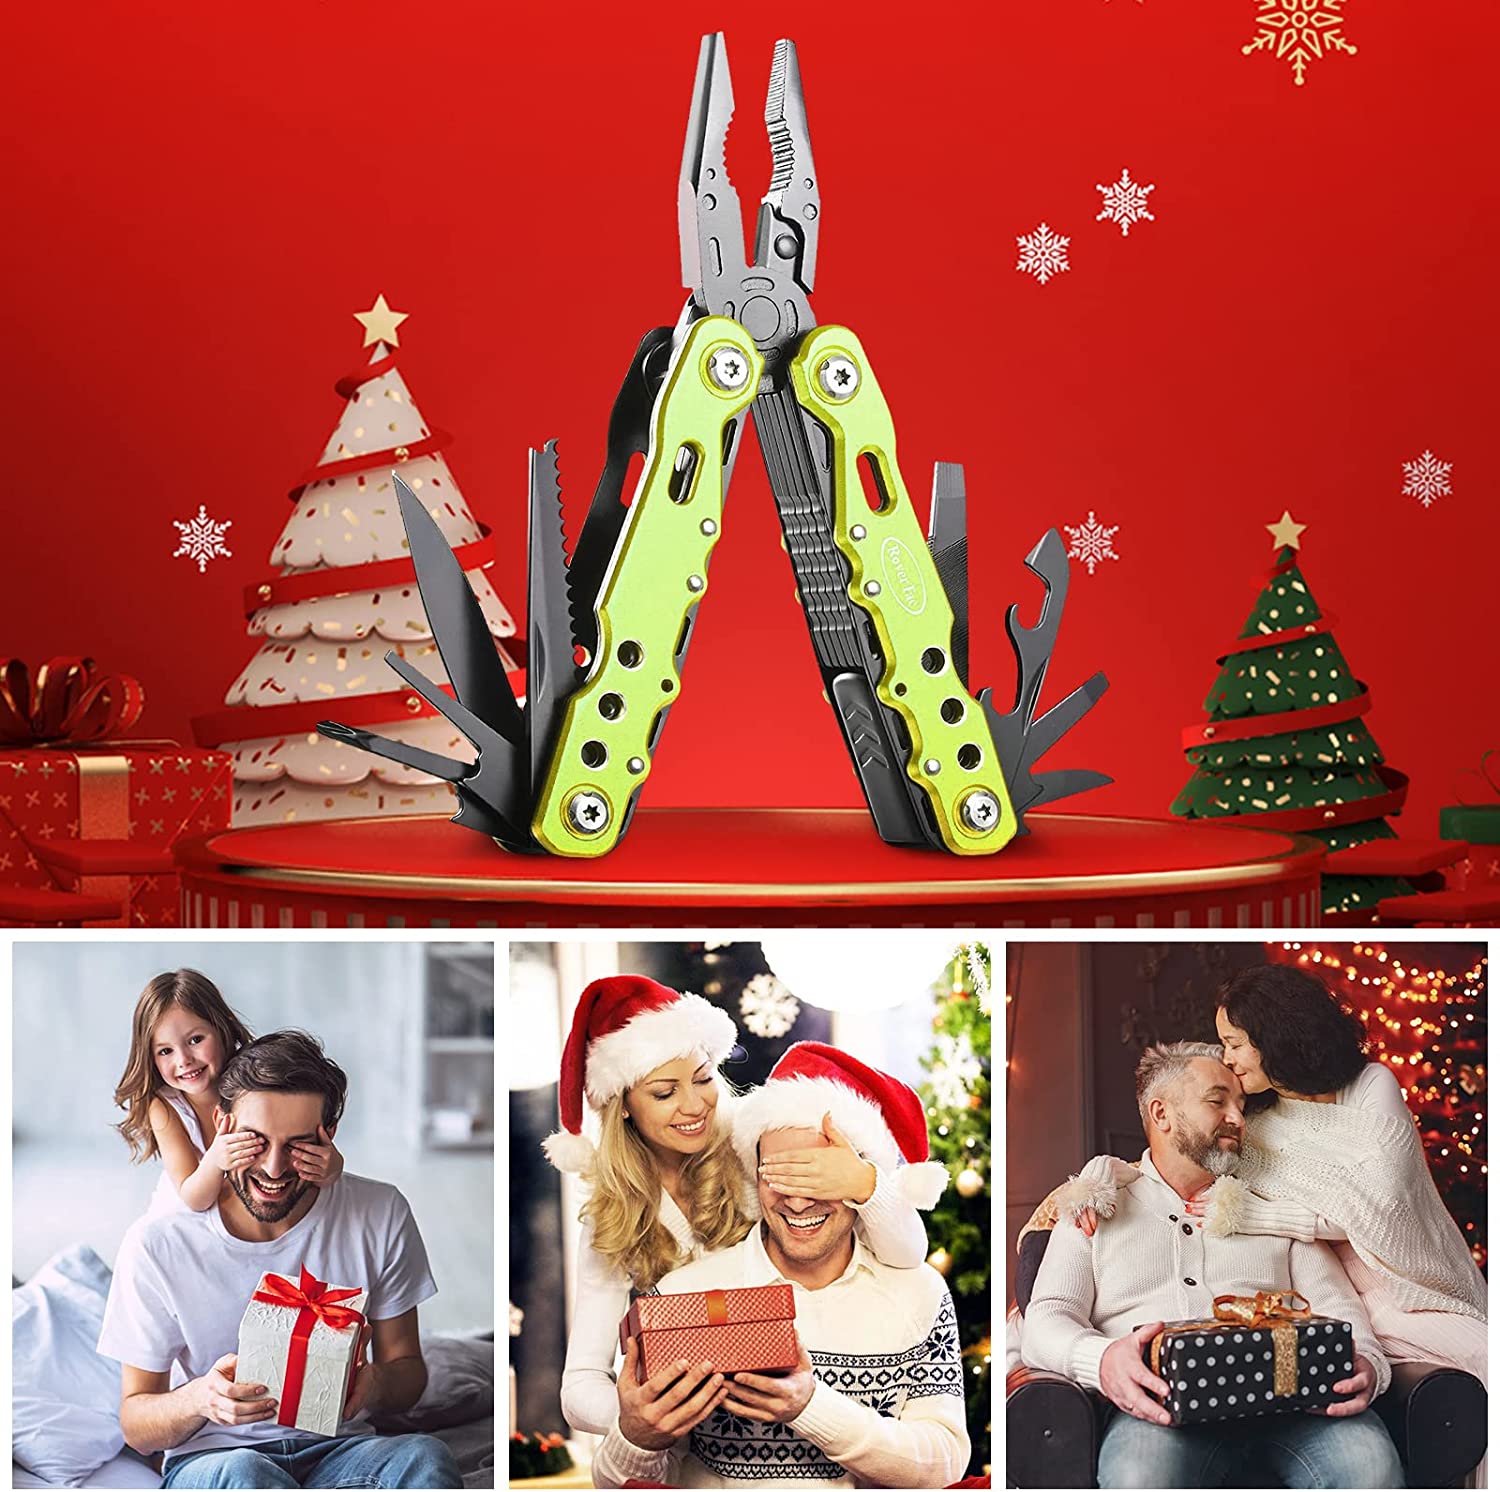 Gifts for Men Dad Husband Gifts for Him Birthday Gifts Unique Mens gifts Ideas RoverTac 14 in 1 Multitool Knife Pliers Screwdrivers Saw Bottle Opener Perfect for Camping Survival Hiking Repairs